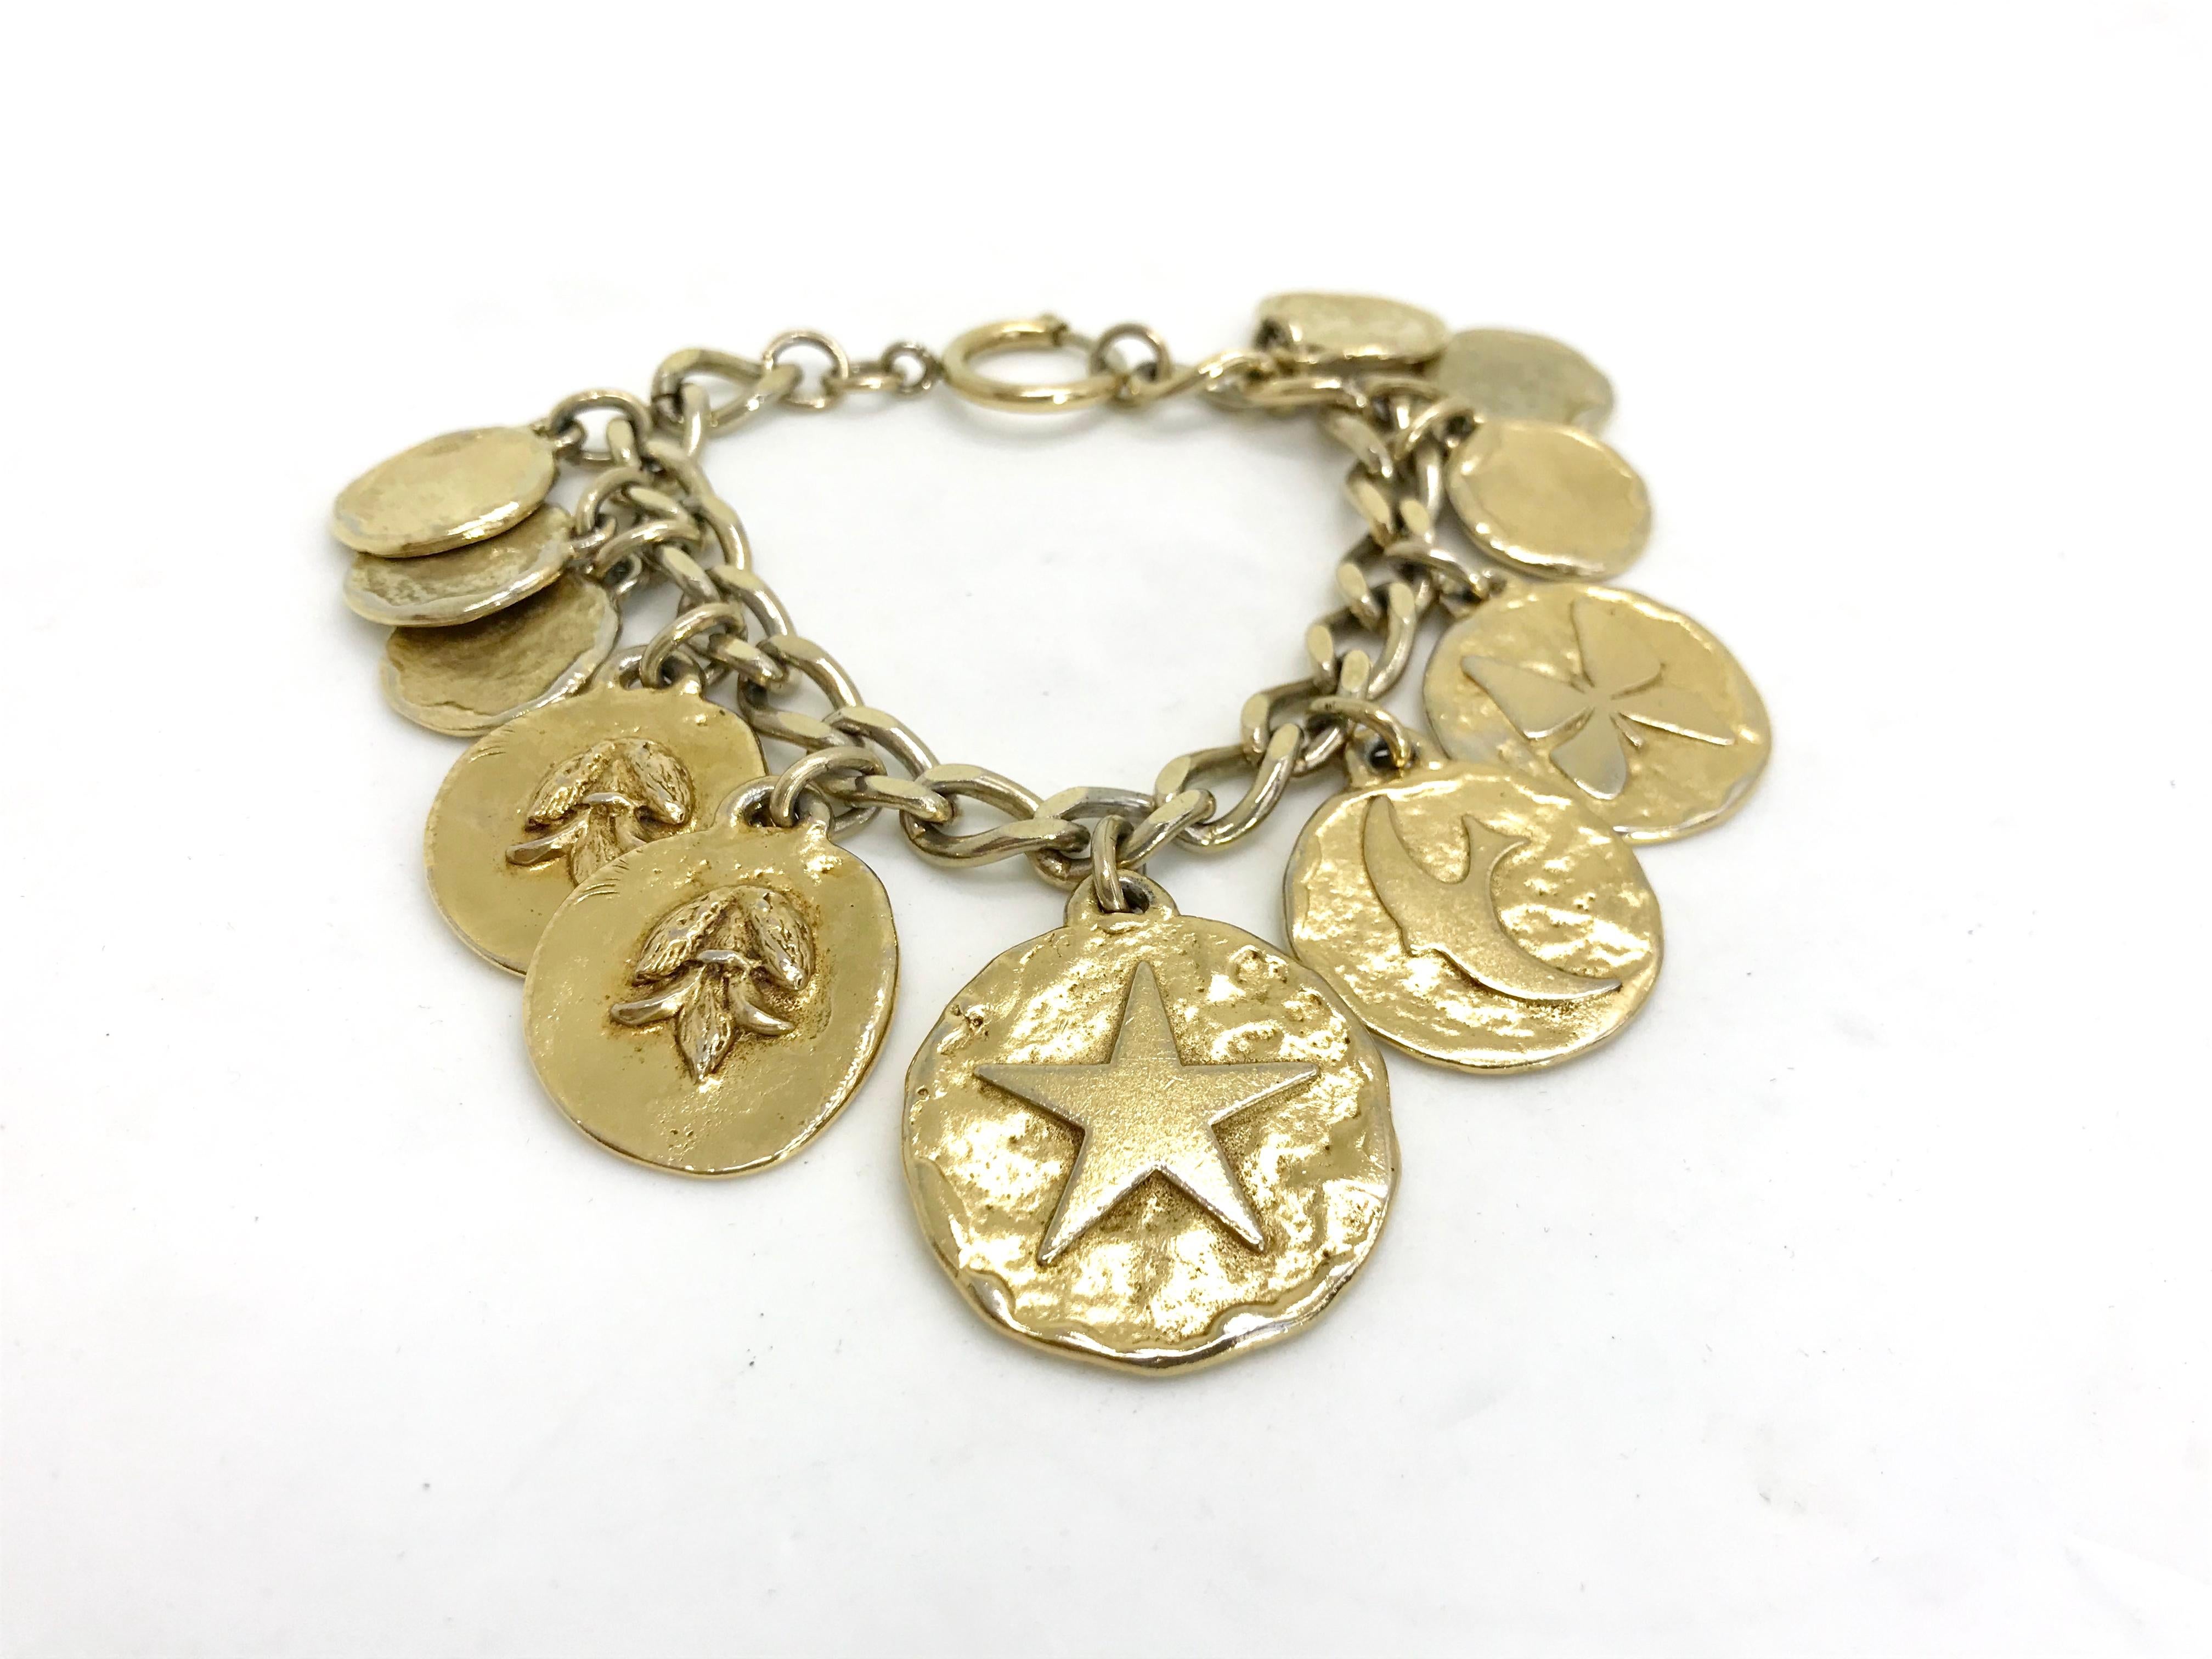 Iconic Yves Saint Laurent  / YSL 1980s Vintage Charm Bracelet.  Featuring a curb chain embellished with classic charms.  

A real statement piece for the discerning collector.

Length : 7,5 inches
- Charm diameter ( biggest ) : 1,2 inch 
- Weight :